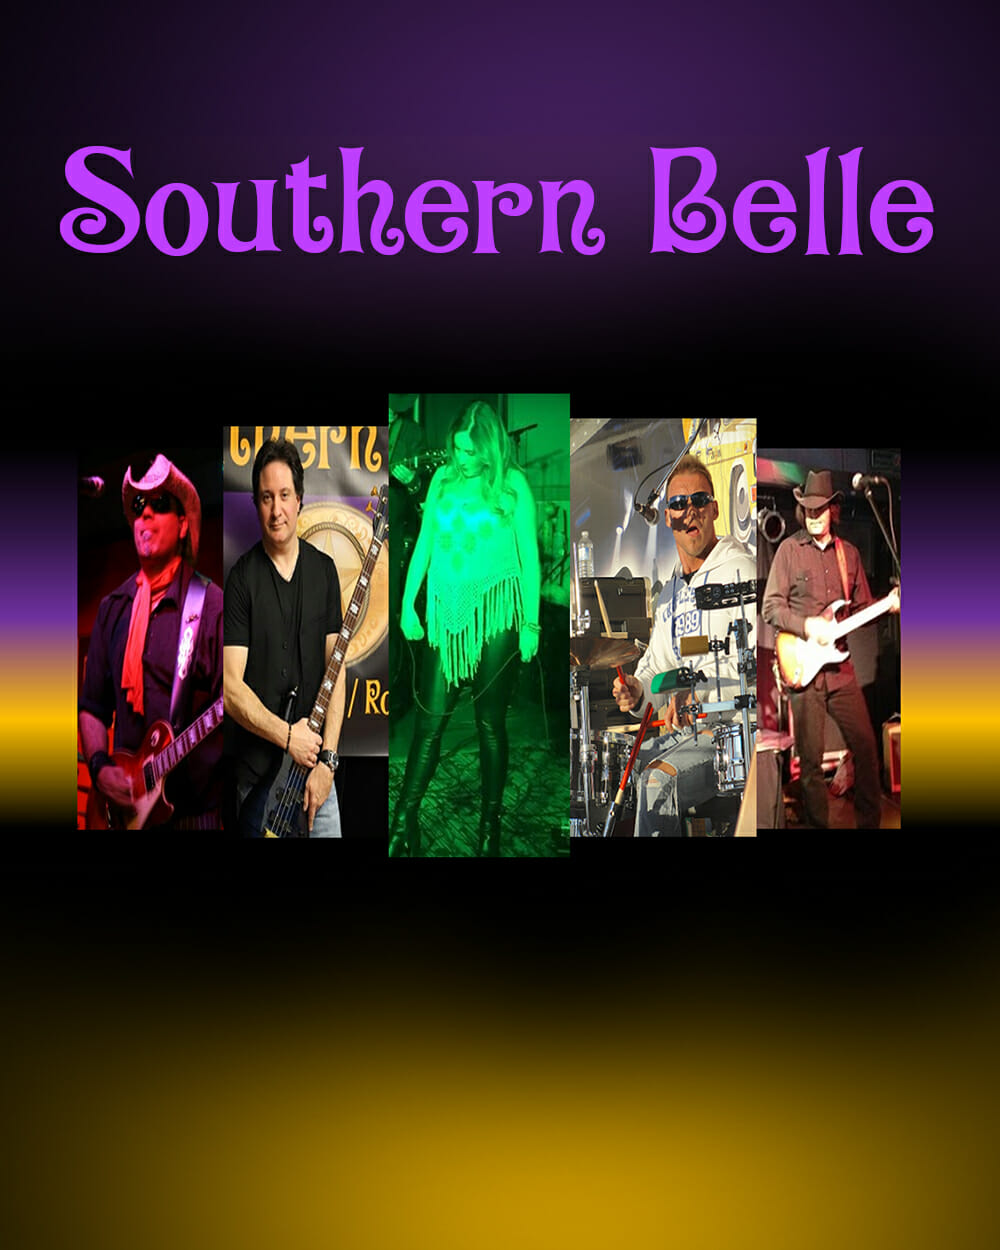 Southern<br>Belle